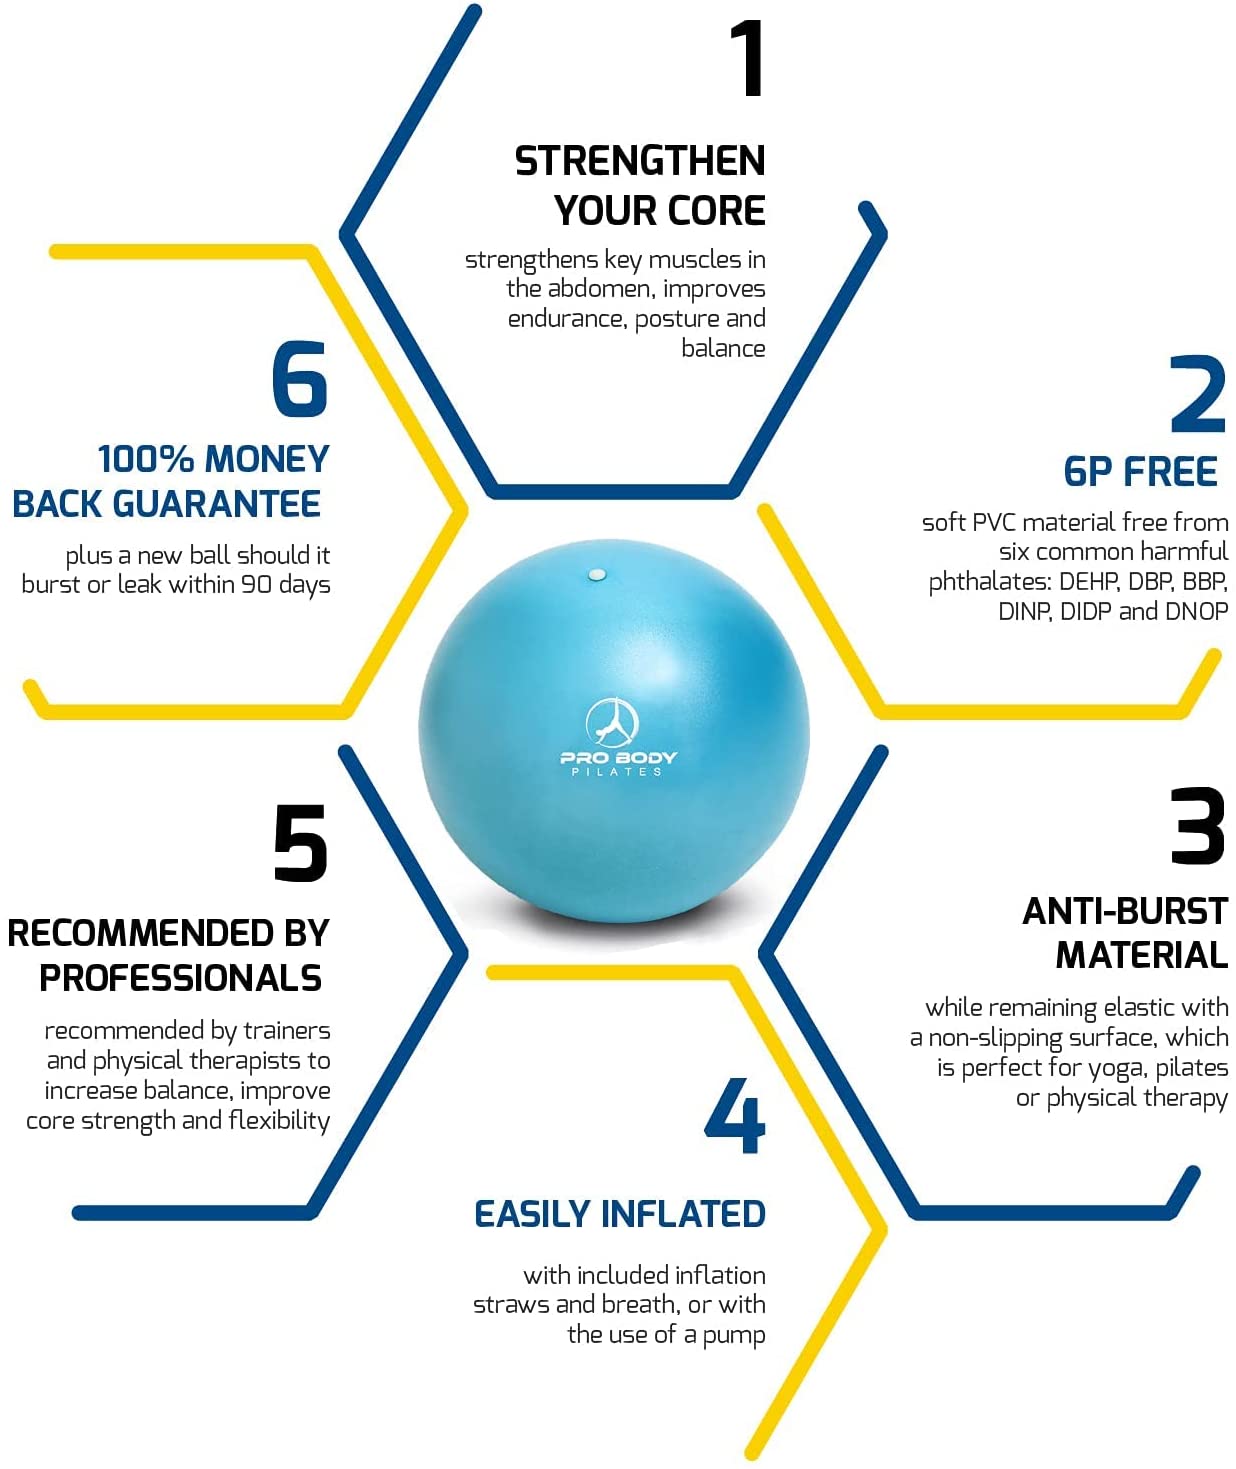 9 Inch Exercise Pilates Ball Mini Exercise Barre Ball for Yoga,Stability  Exercise Training Gym Anti Burst and Slip Resistant Balls Physical Therapy  Improves Balance, Core Strength, Back Pain Posture - Compleo Waco